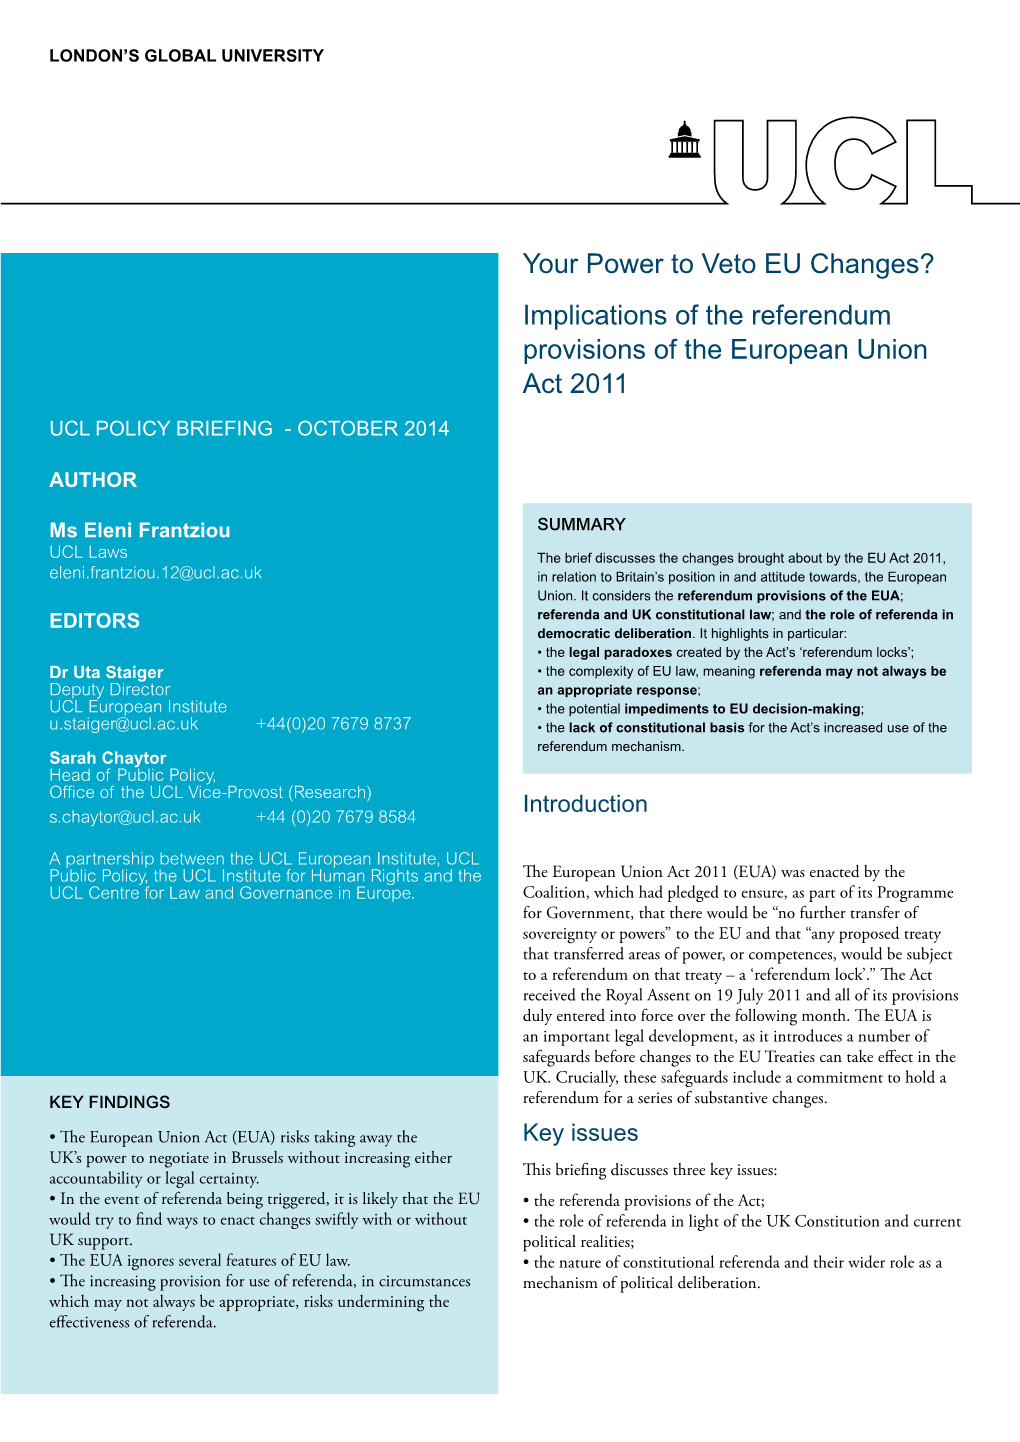 Implications of the Referendum Provisions of the European Union Act 2011 Ucl Policy Briefing - October 2014